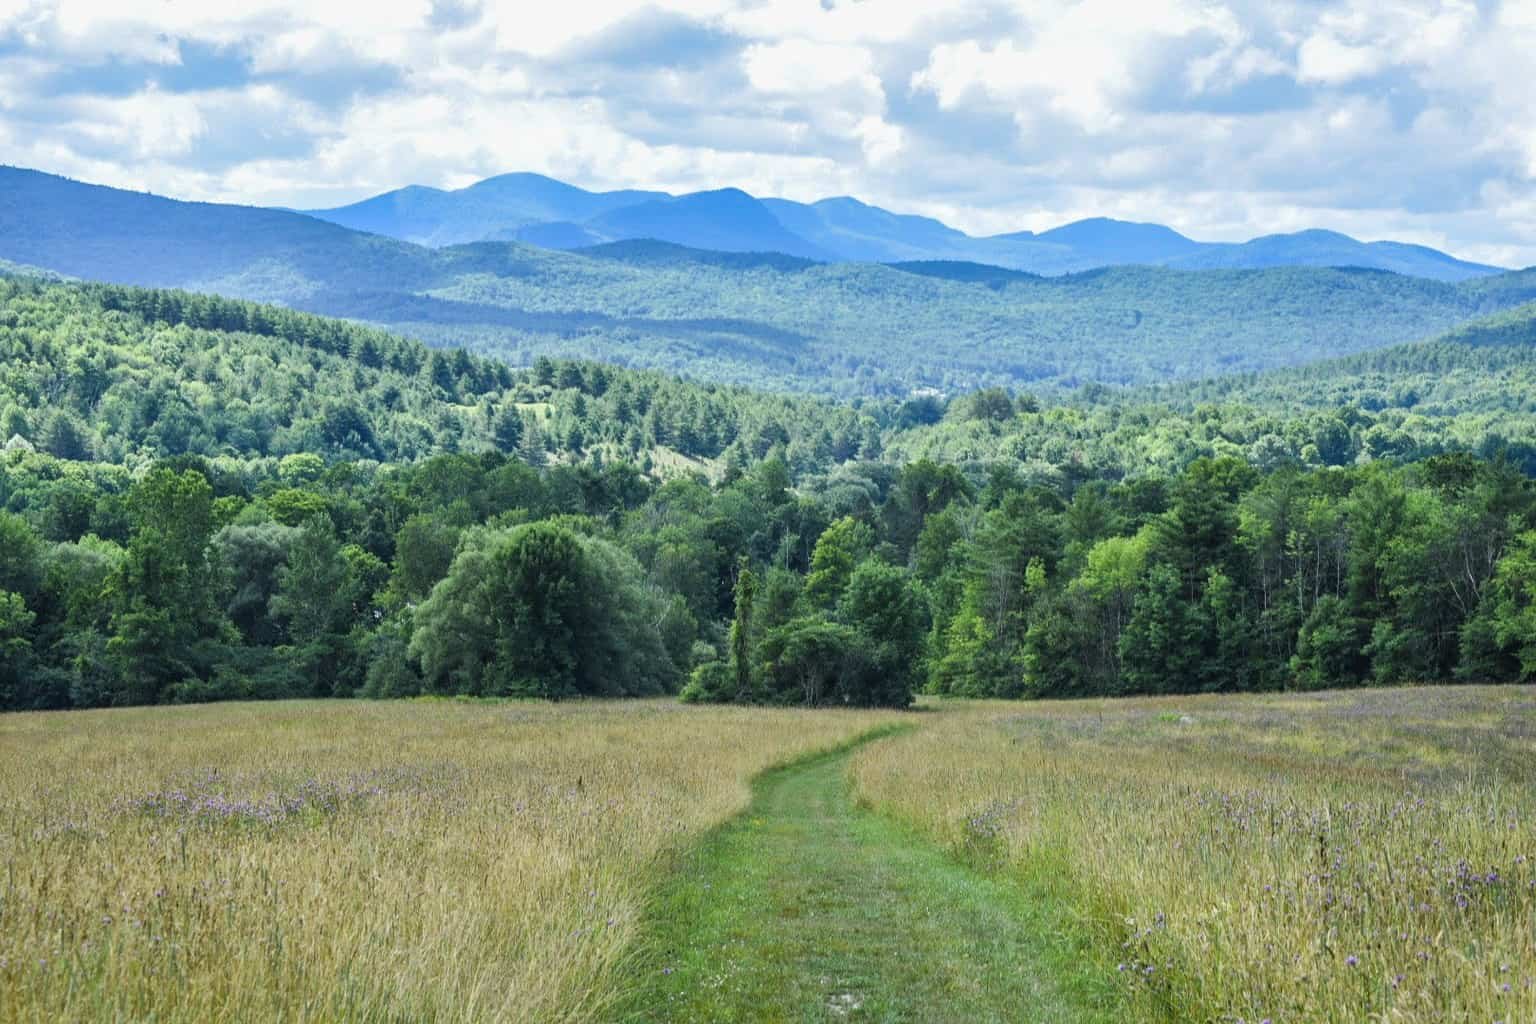 Plan a Day Trip to Taconic Mountains Ramble State Park